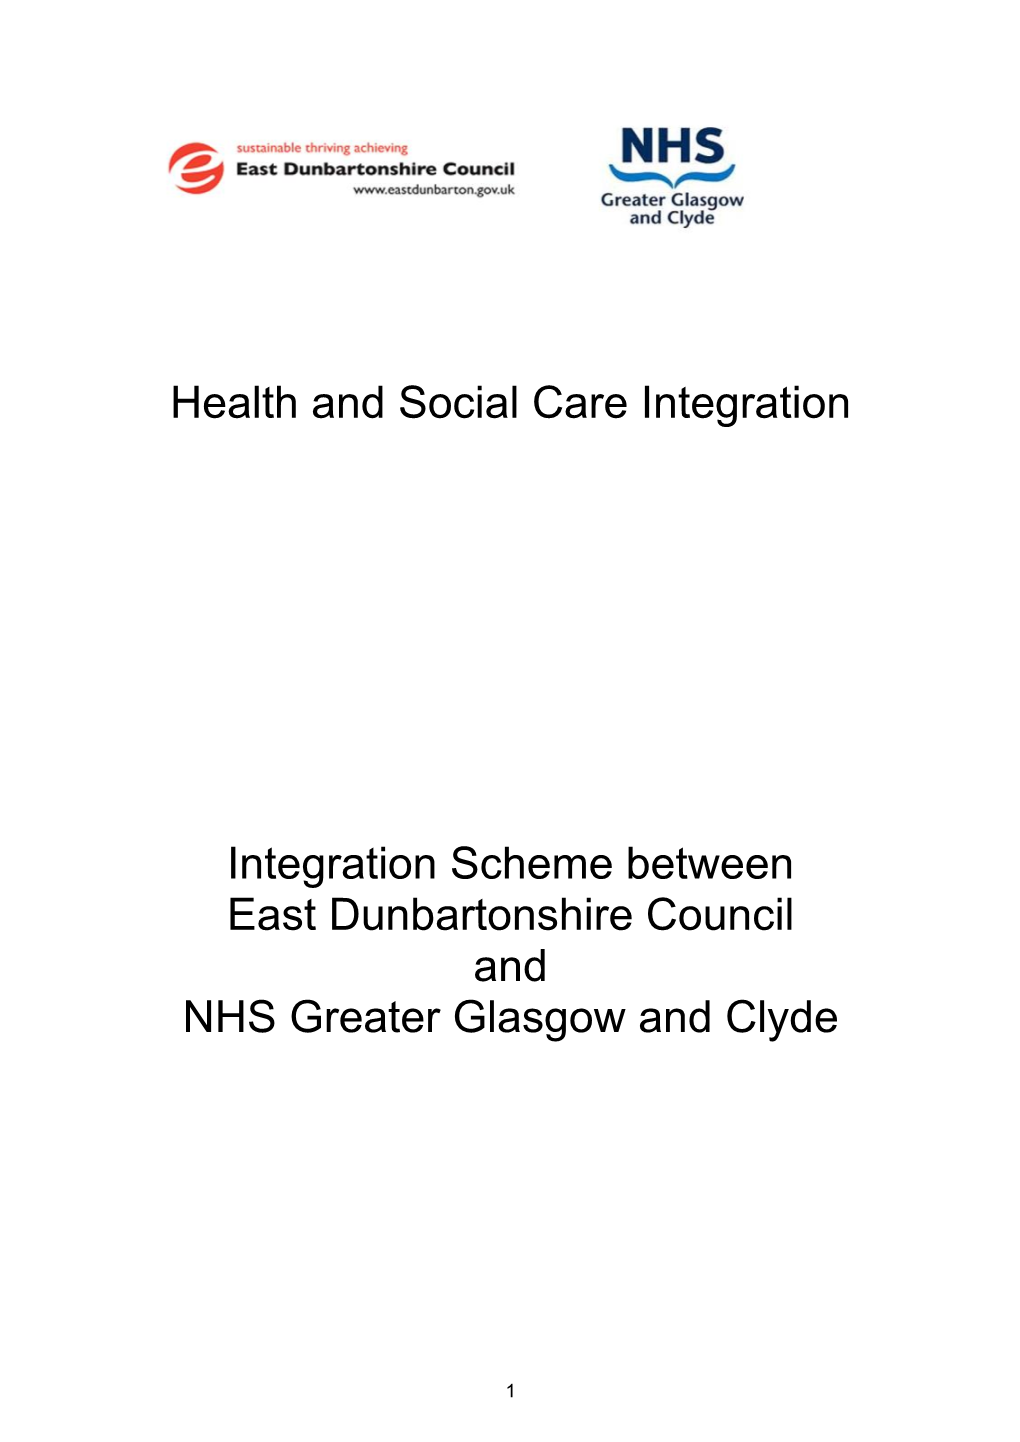 Health and Social Care Integration Integration Scheme Between East Dunbartonshire Council and NHS Greater Glasgow and Clyde